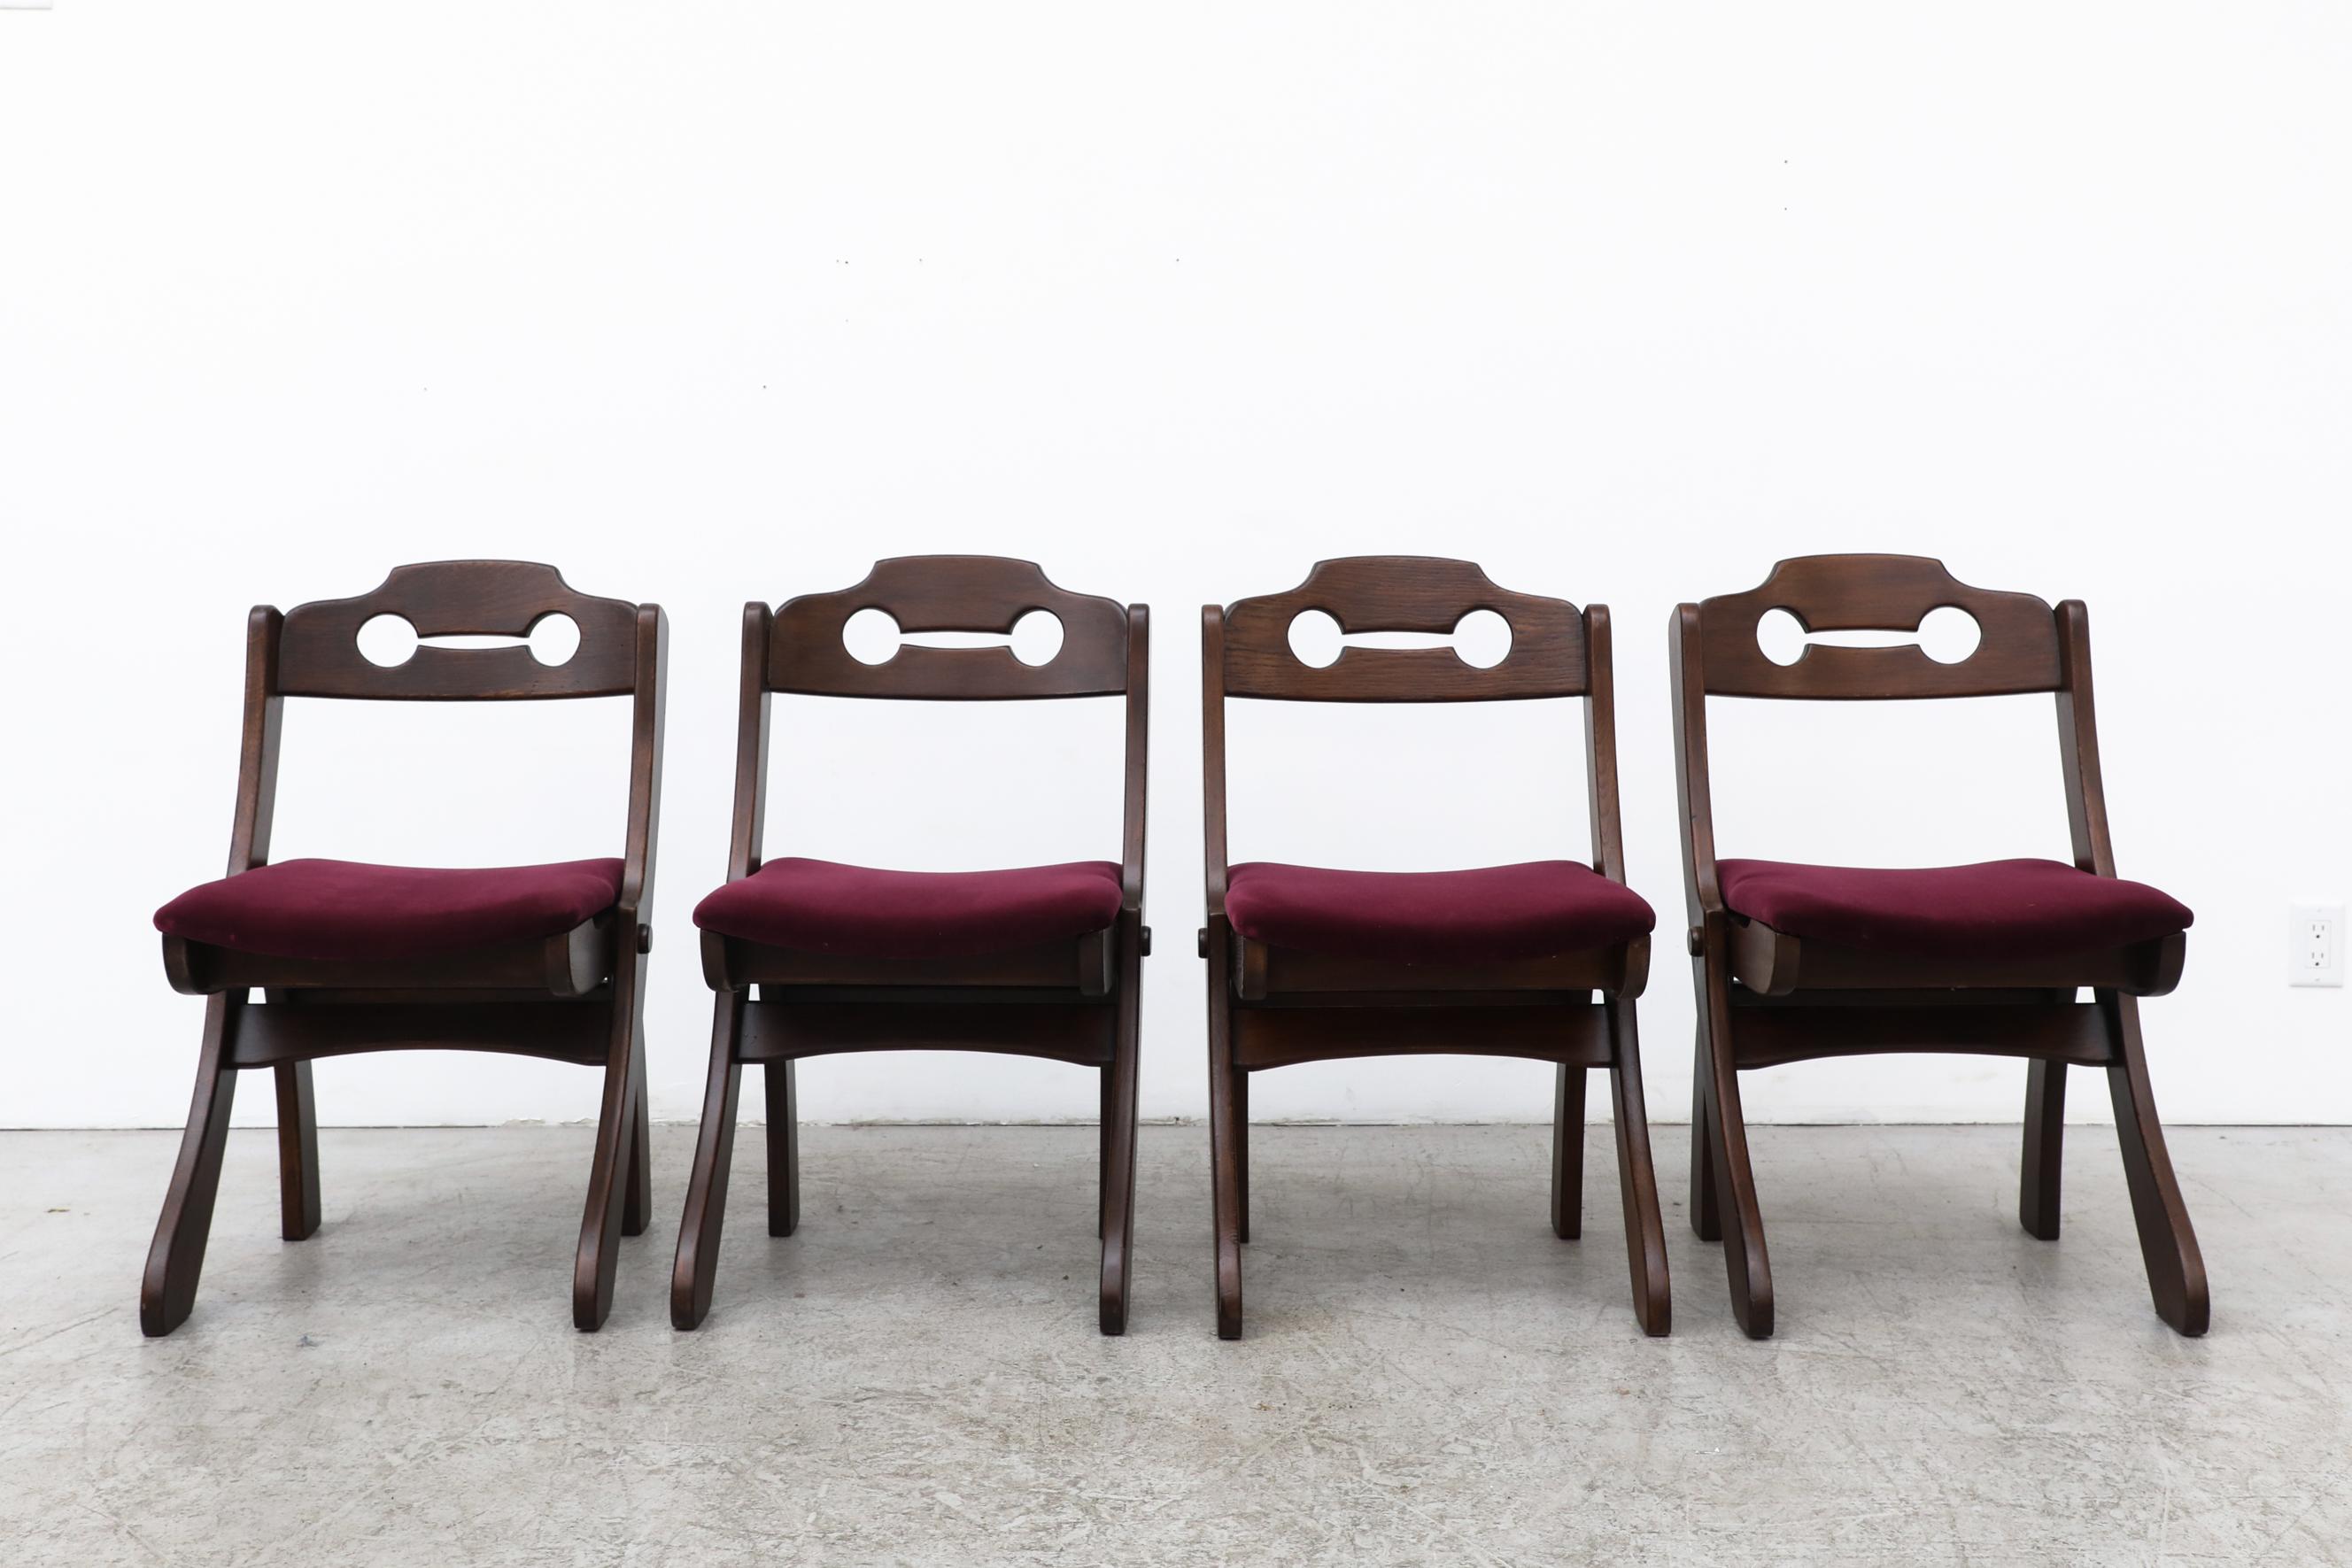 Set of 4 dark stained brutalist razor back chairs with new burgundy velvet seats. Lightly refinished with some remaining visible wear, consistent with age and use. Set price.